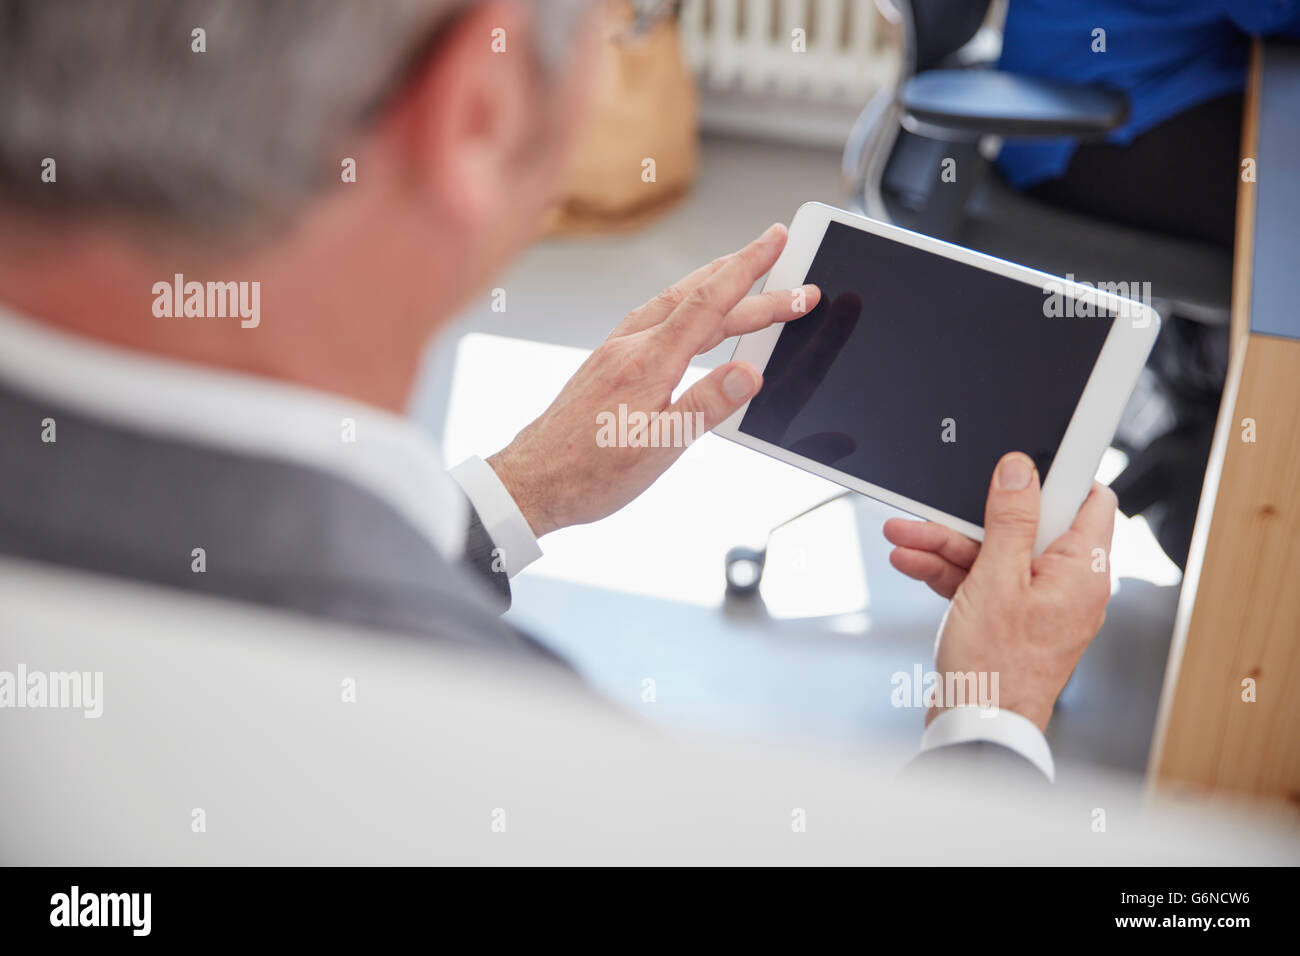 Mature man using digital tablet in office Stock Photo